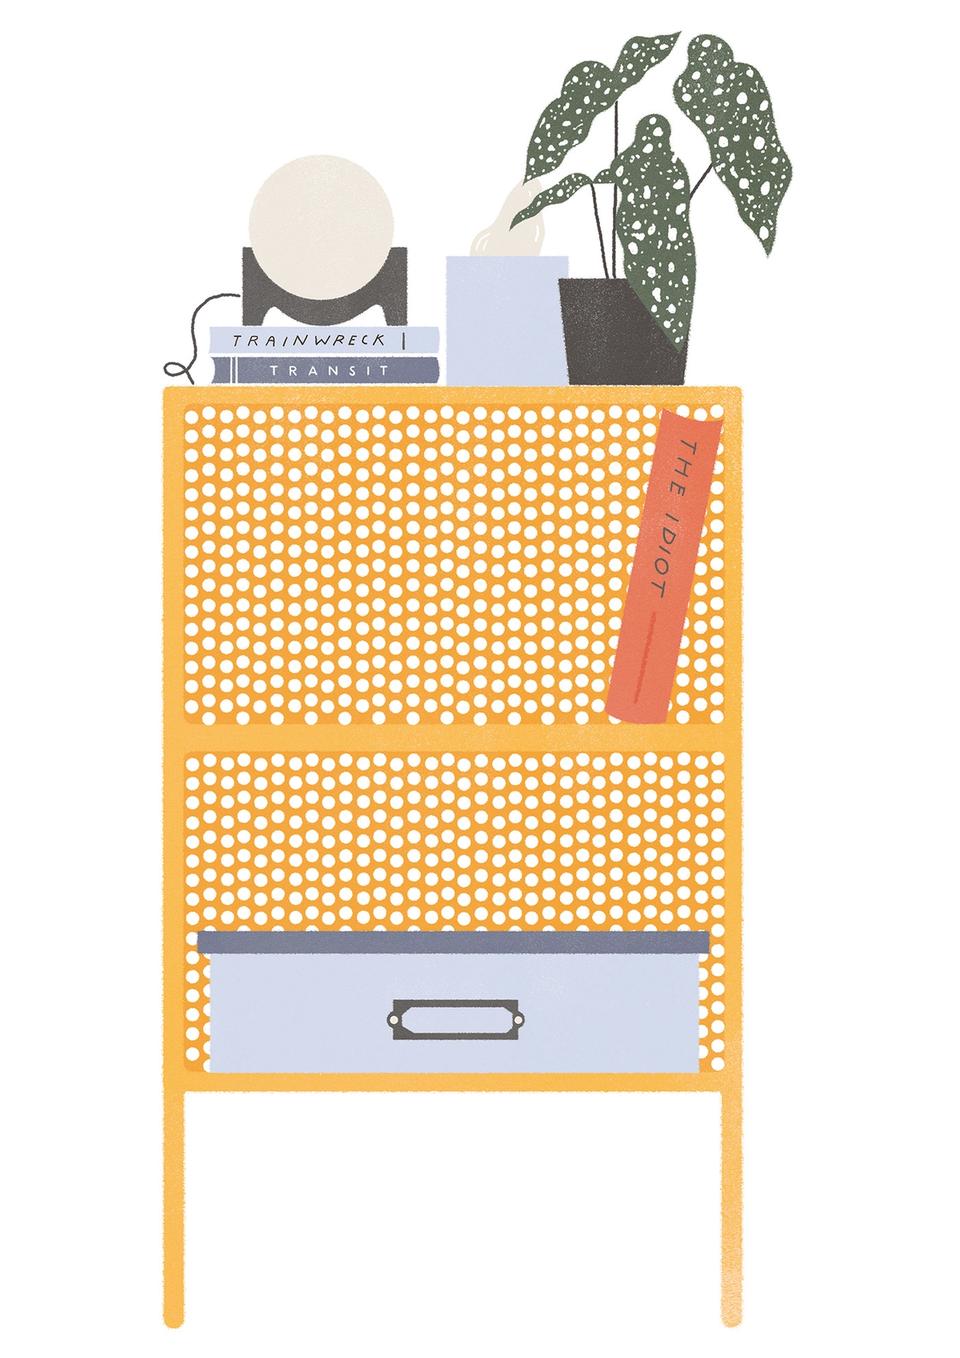 Illustration of furniture, nightstand with books, lamp and begonia plant